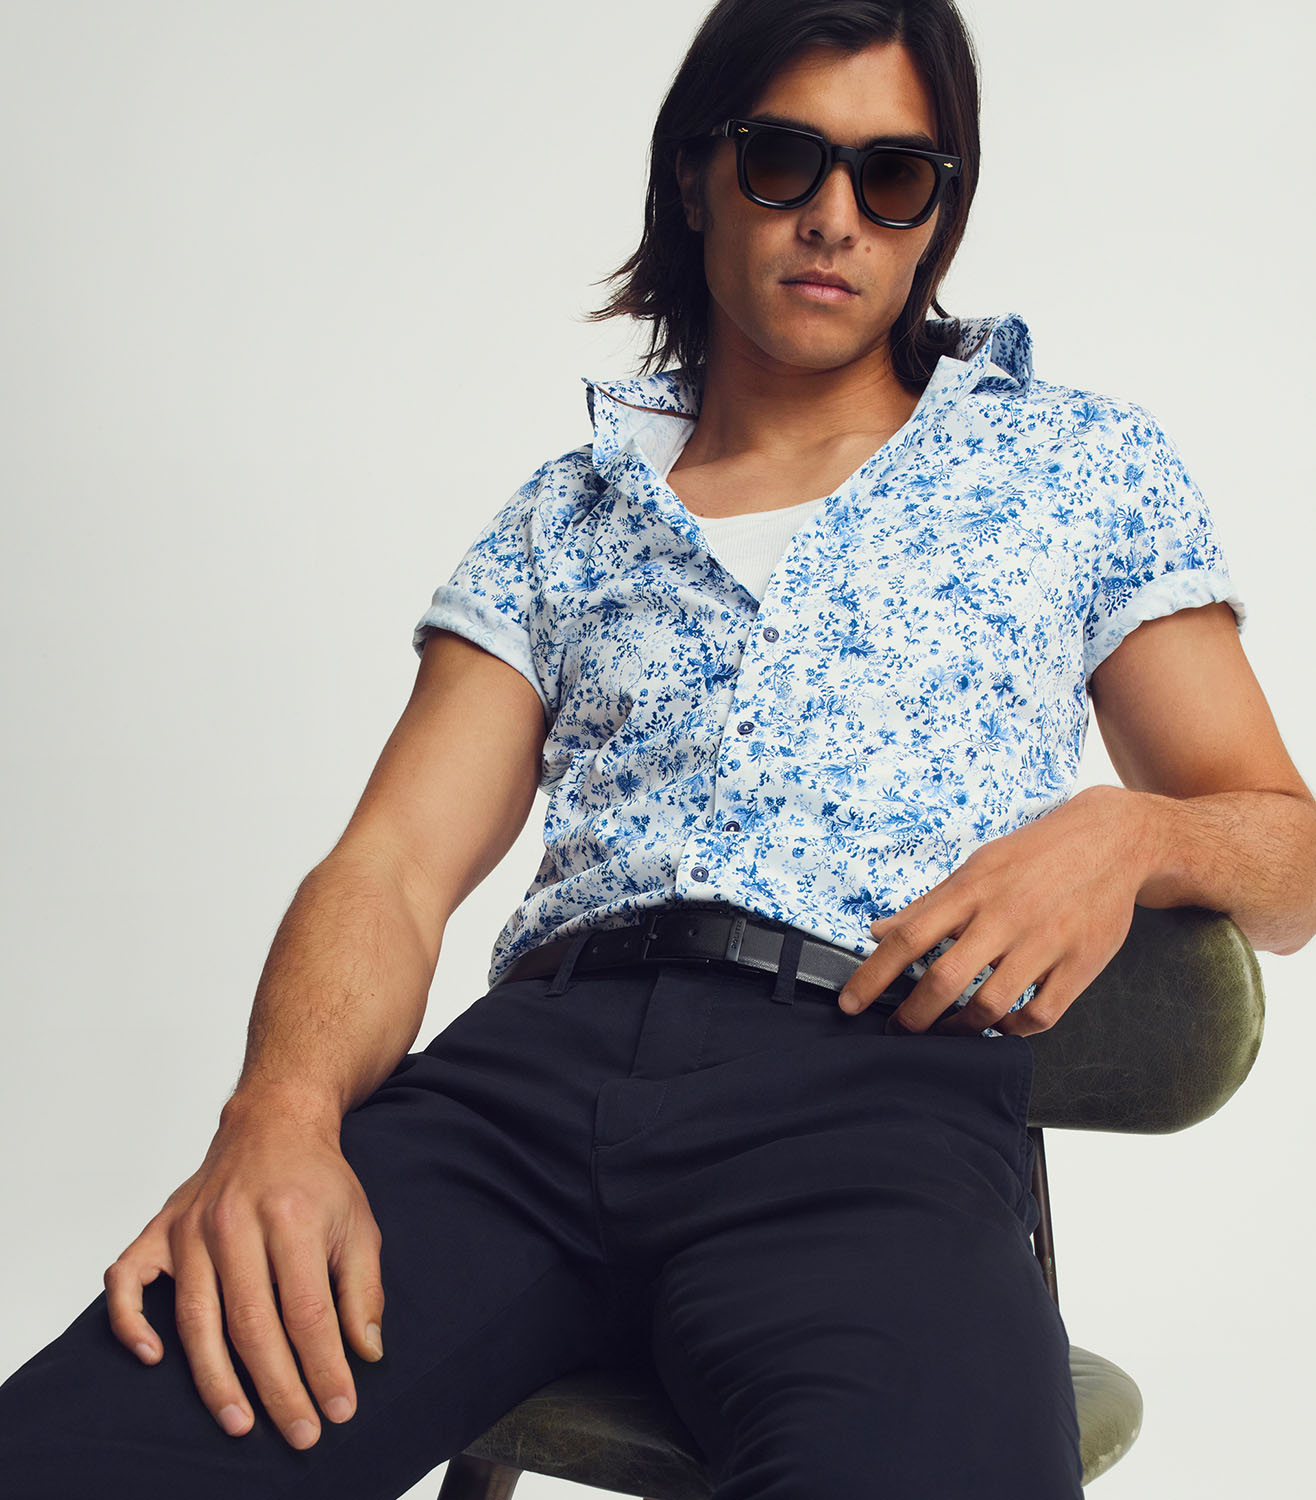 New Season Statement Shirts - White and blue floral shirt